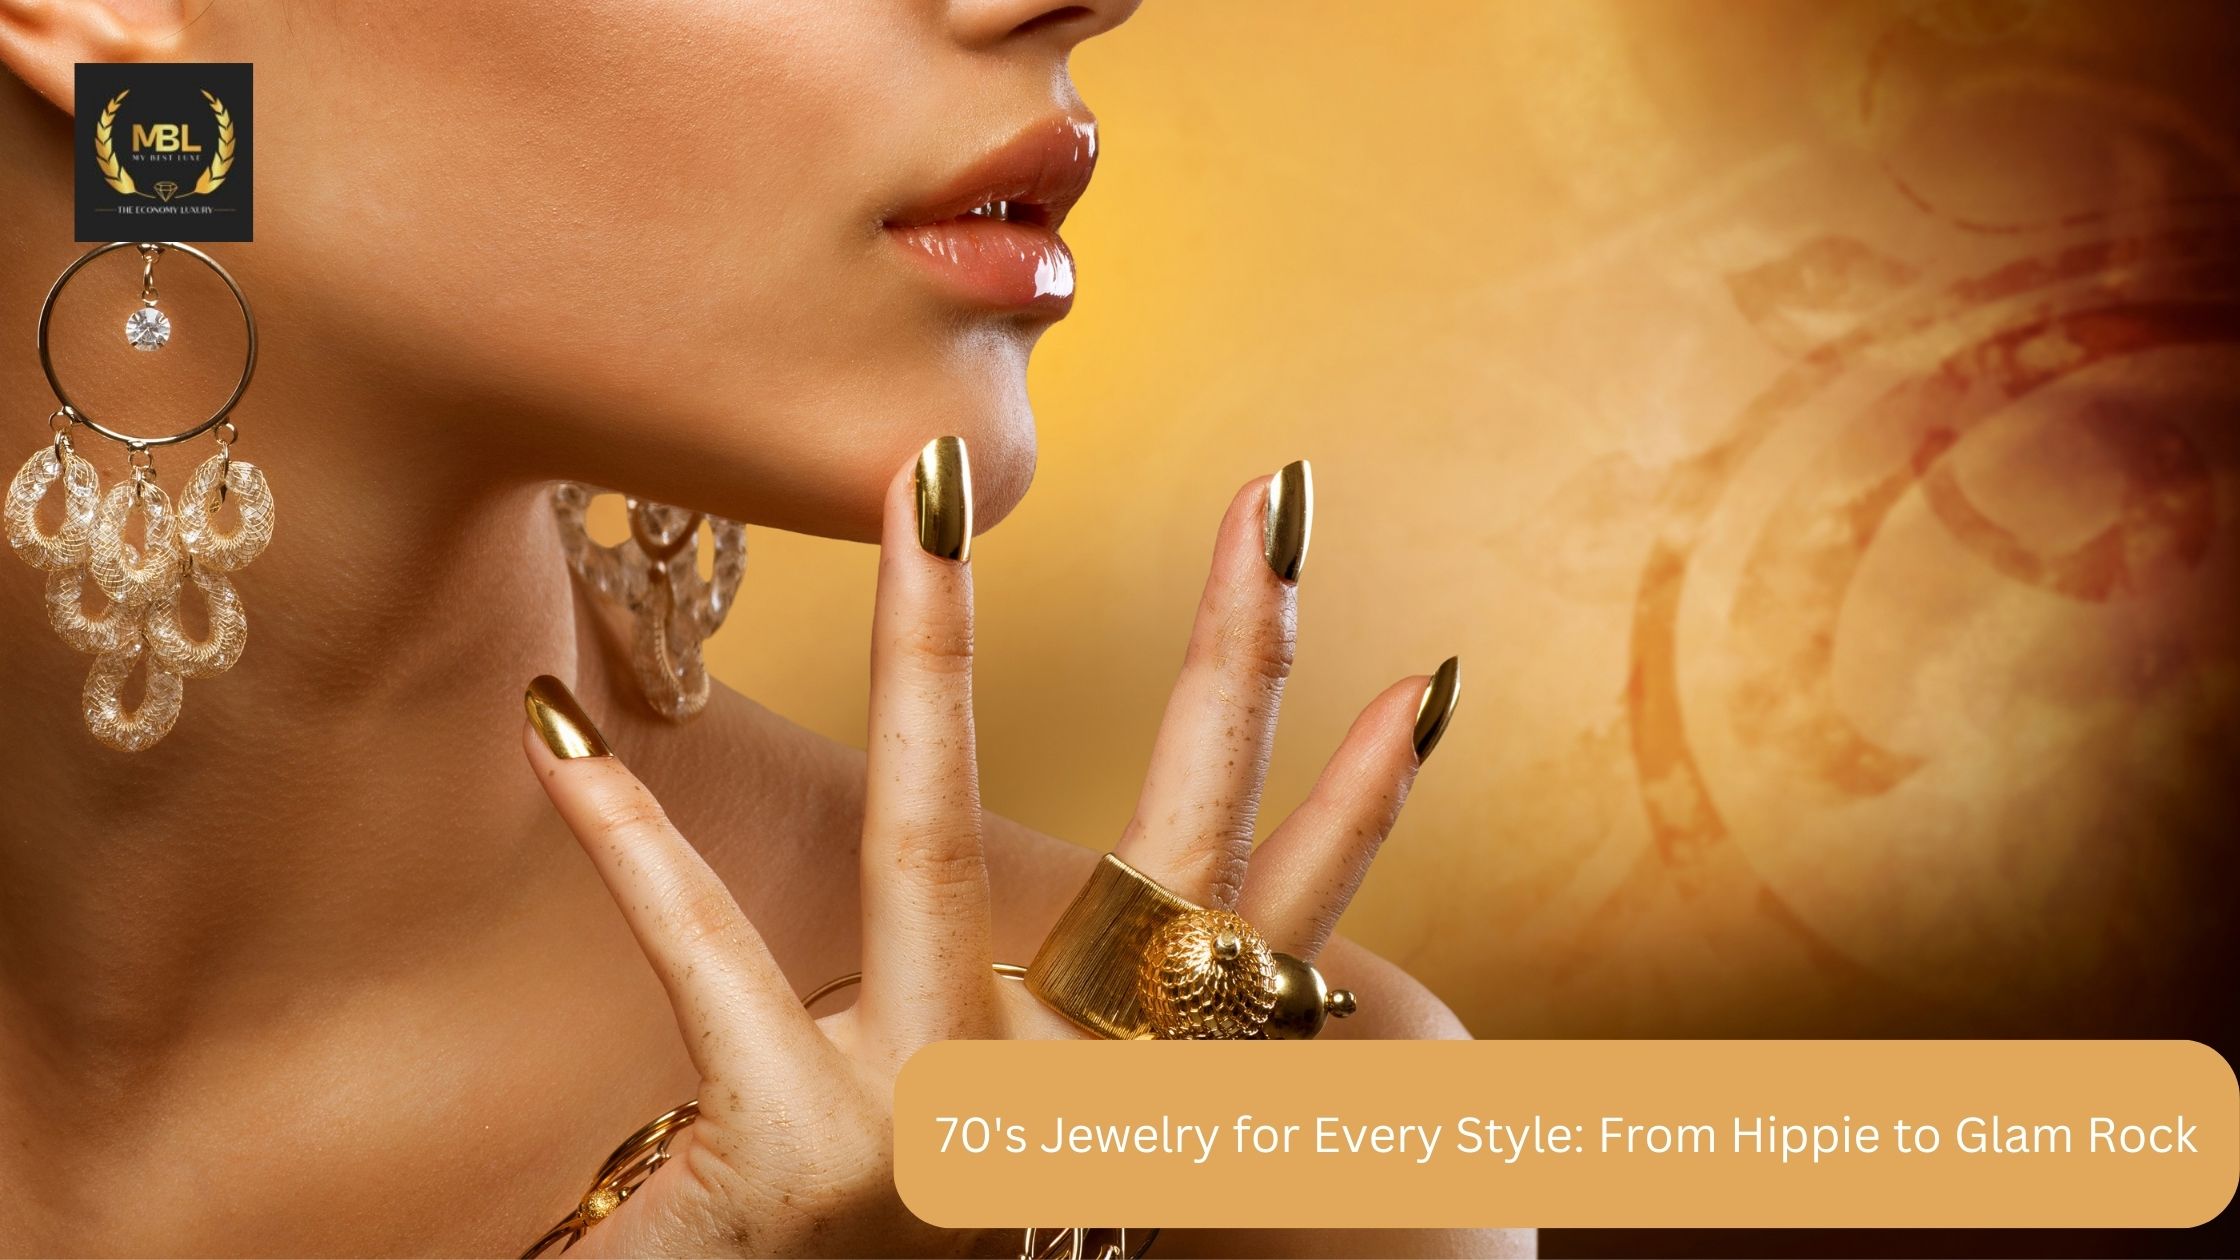 70's Jewelry for Every Style